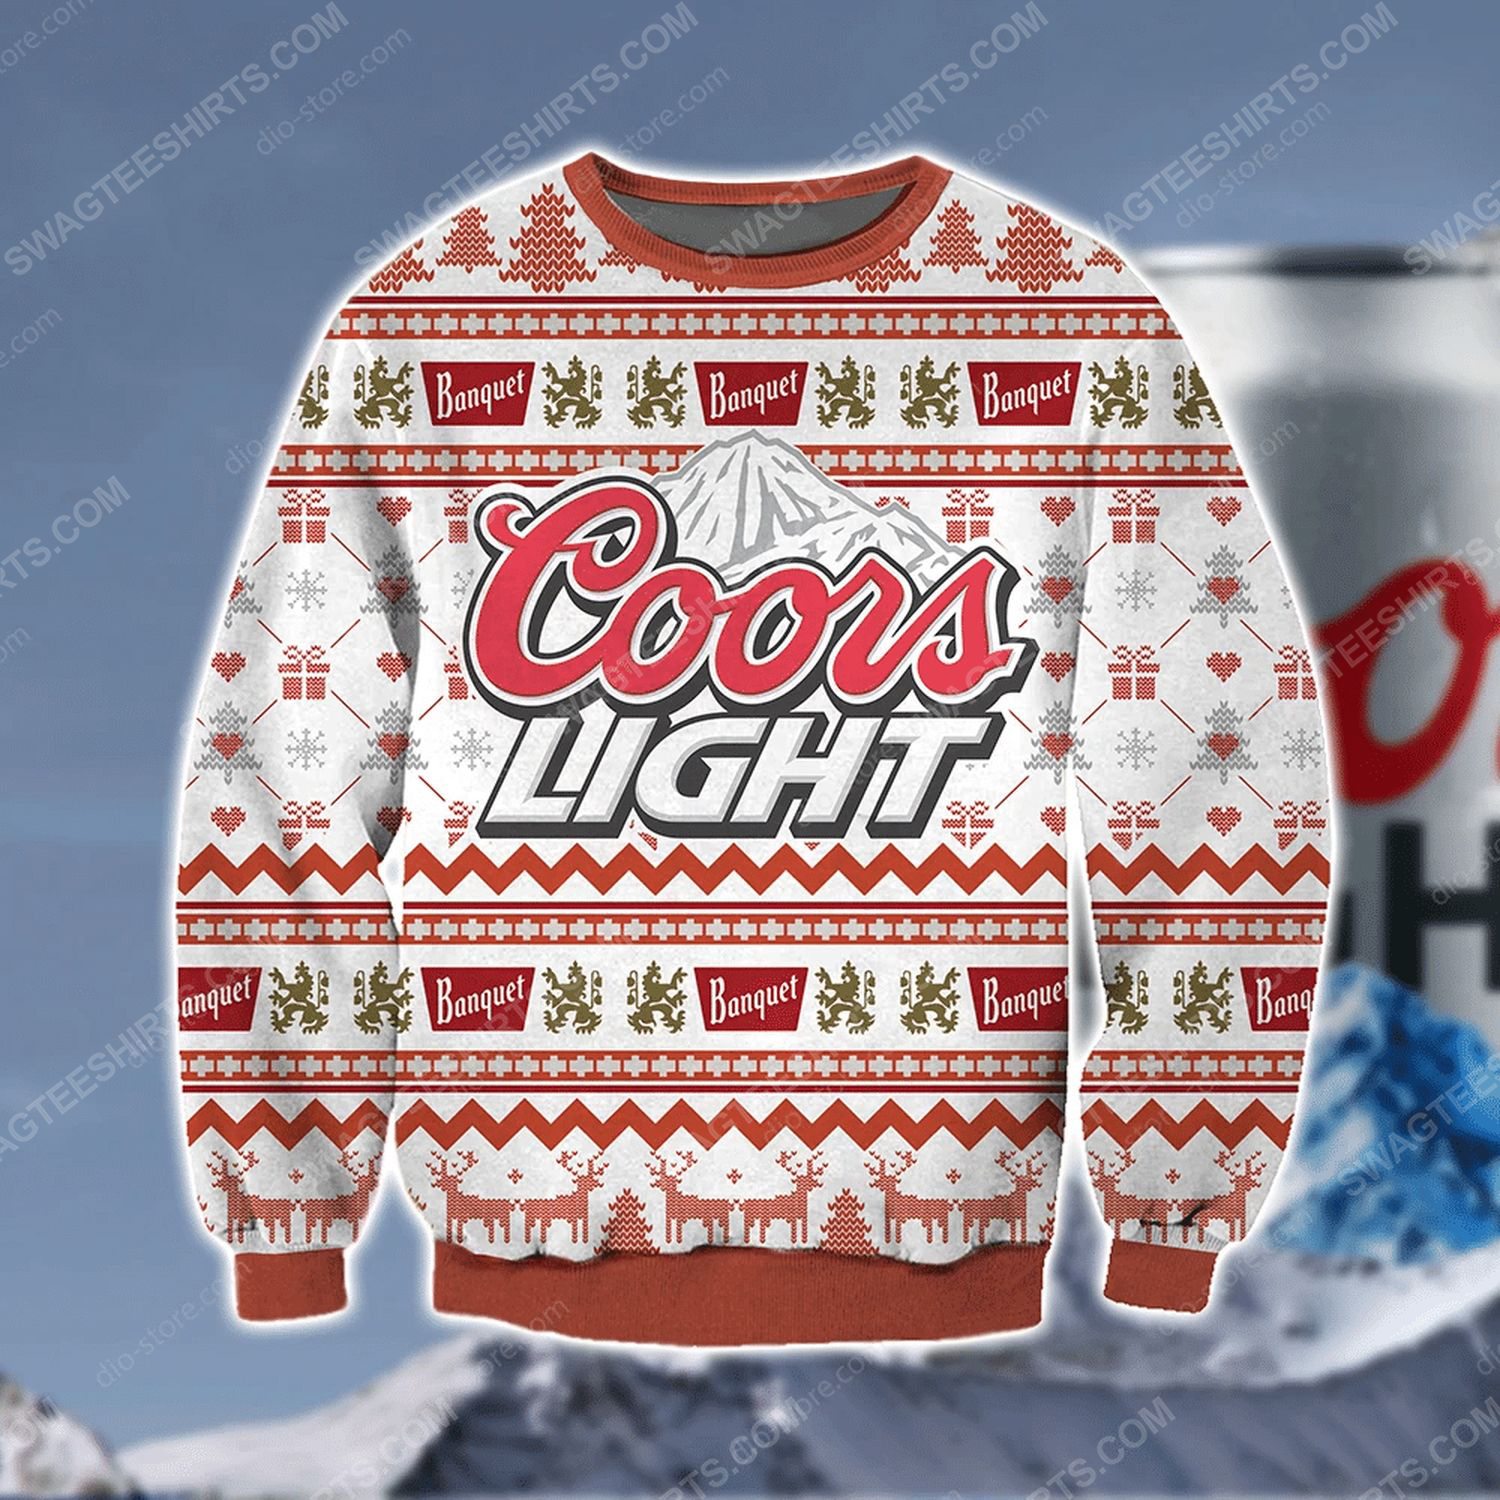 Coors light banquet beer ugly christmas sweater - Copy (2)